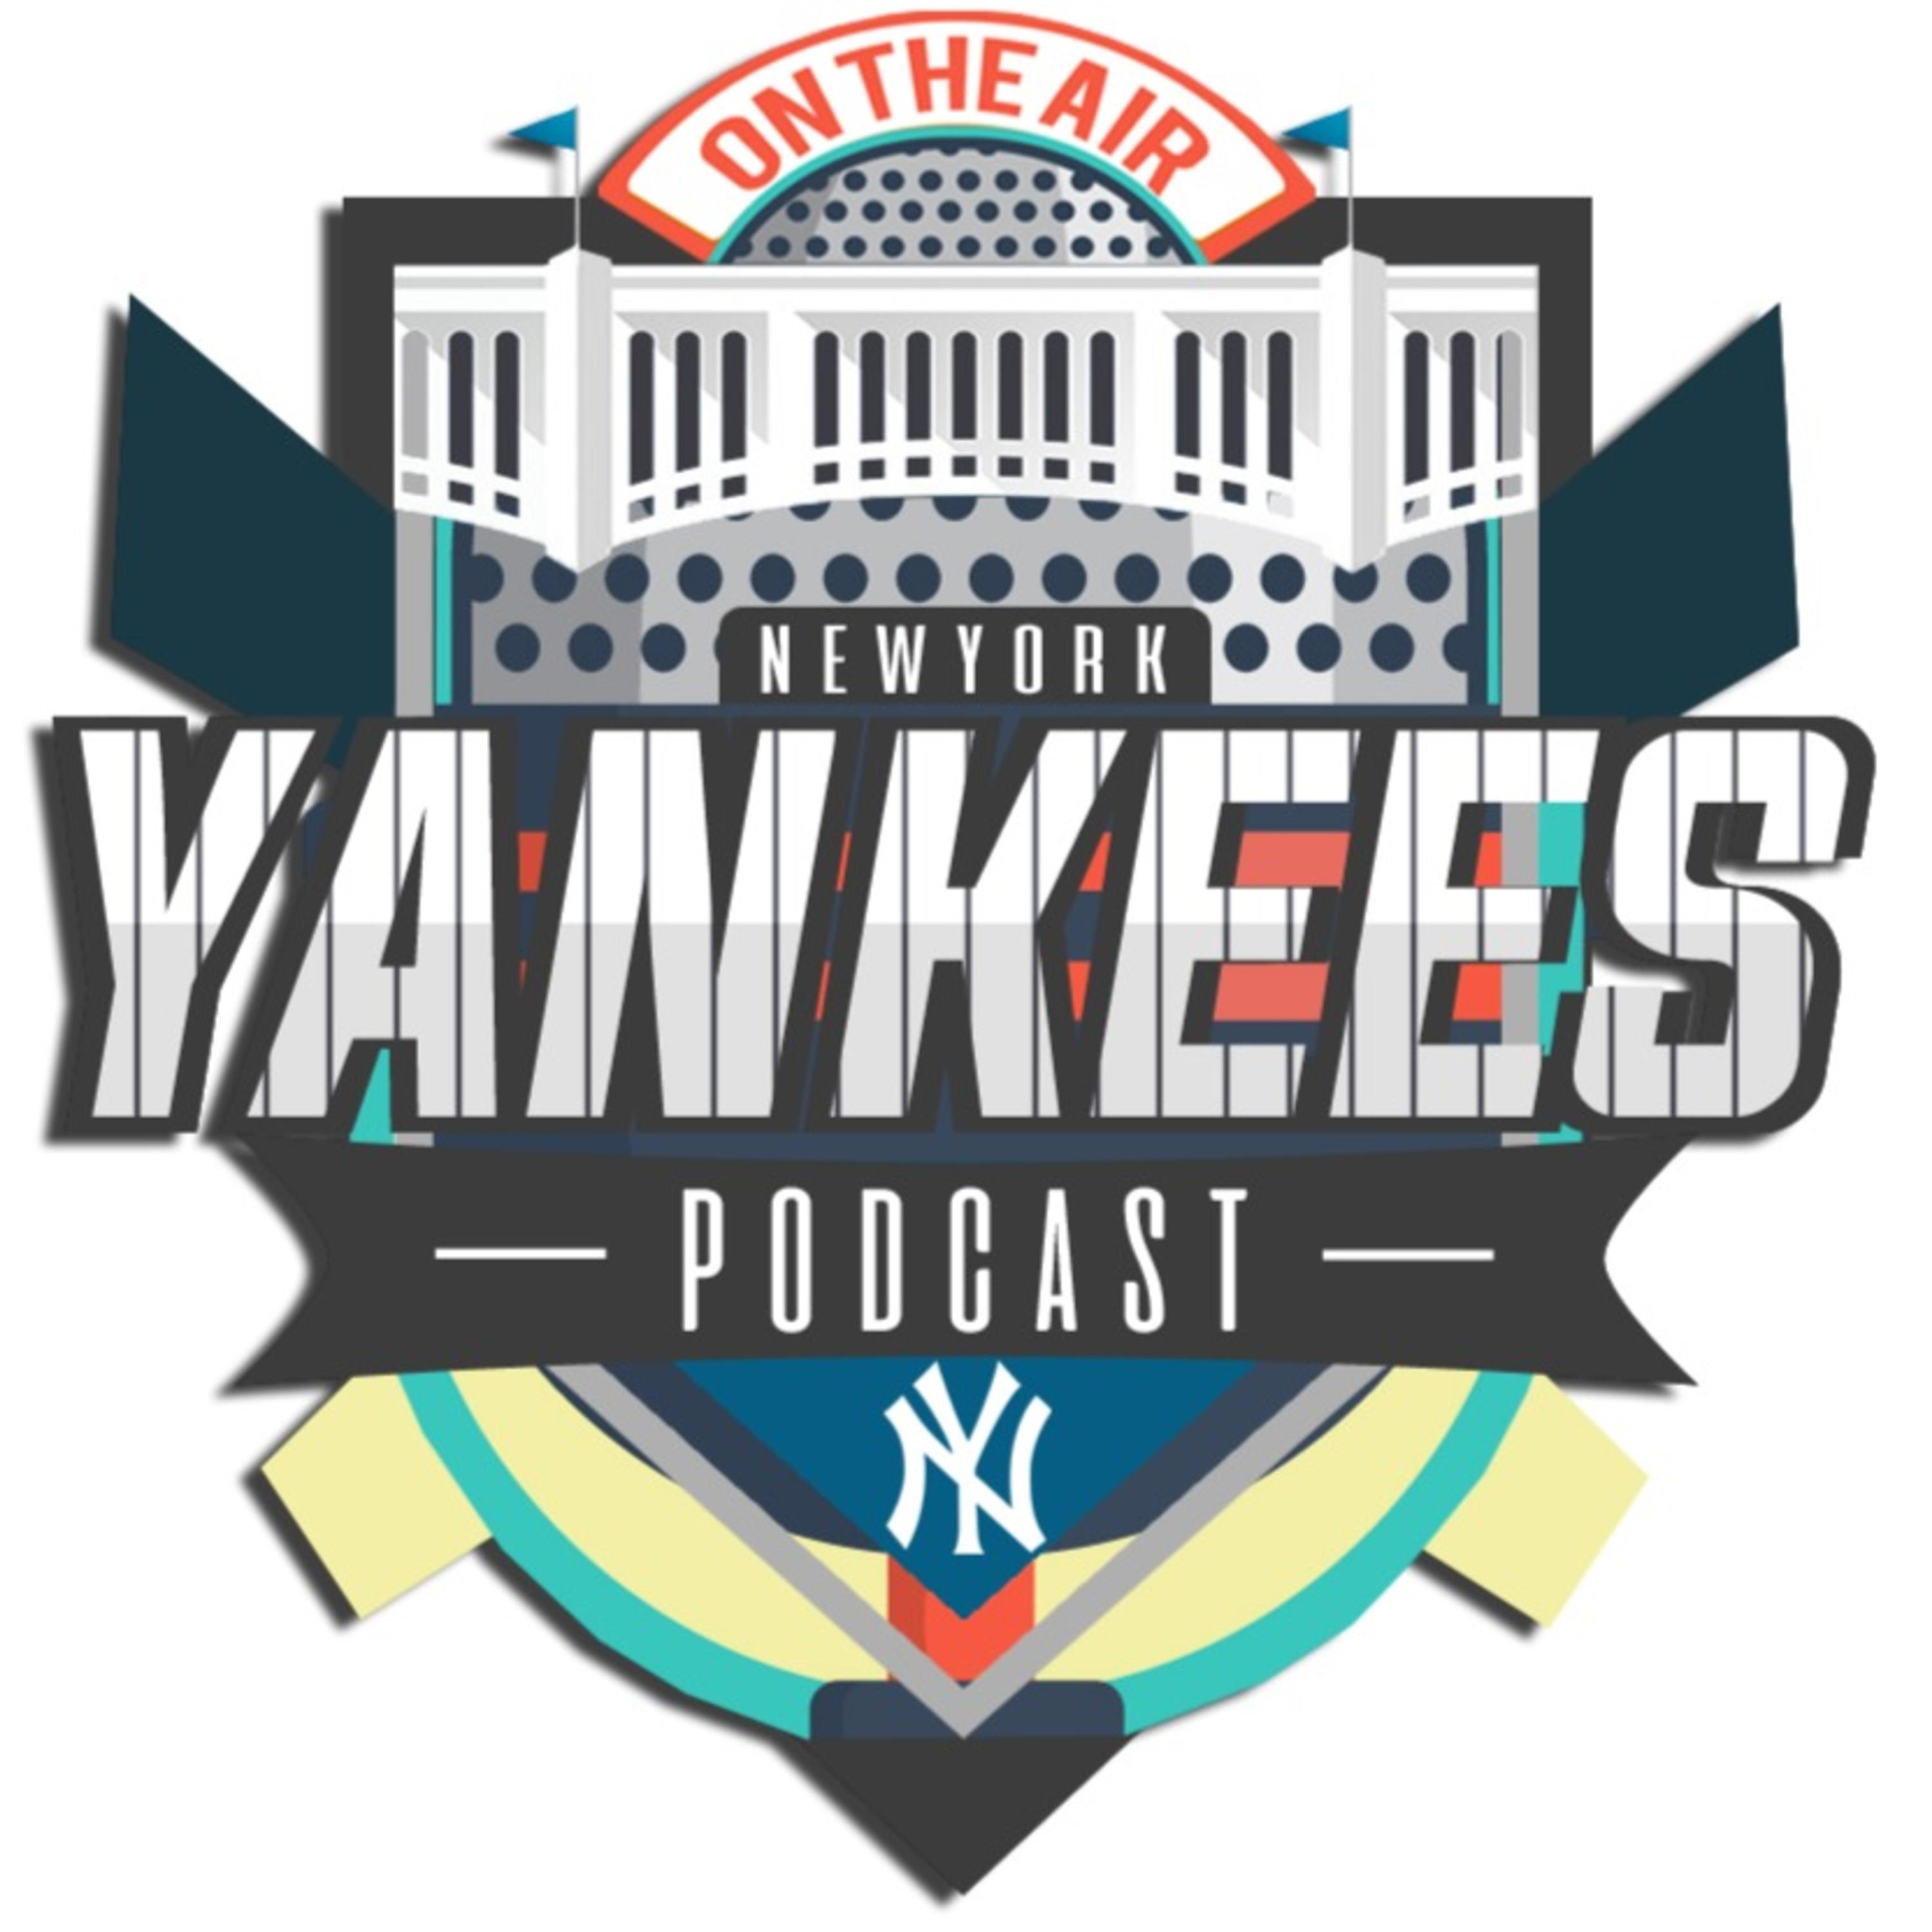 New York Yankees Hungary Podcast - Bé x DS! x Mike - S02EP25 - Yankees - Red Sox: The Rivalry - Episode 4